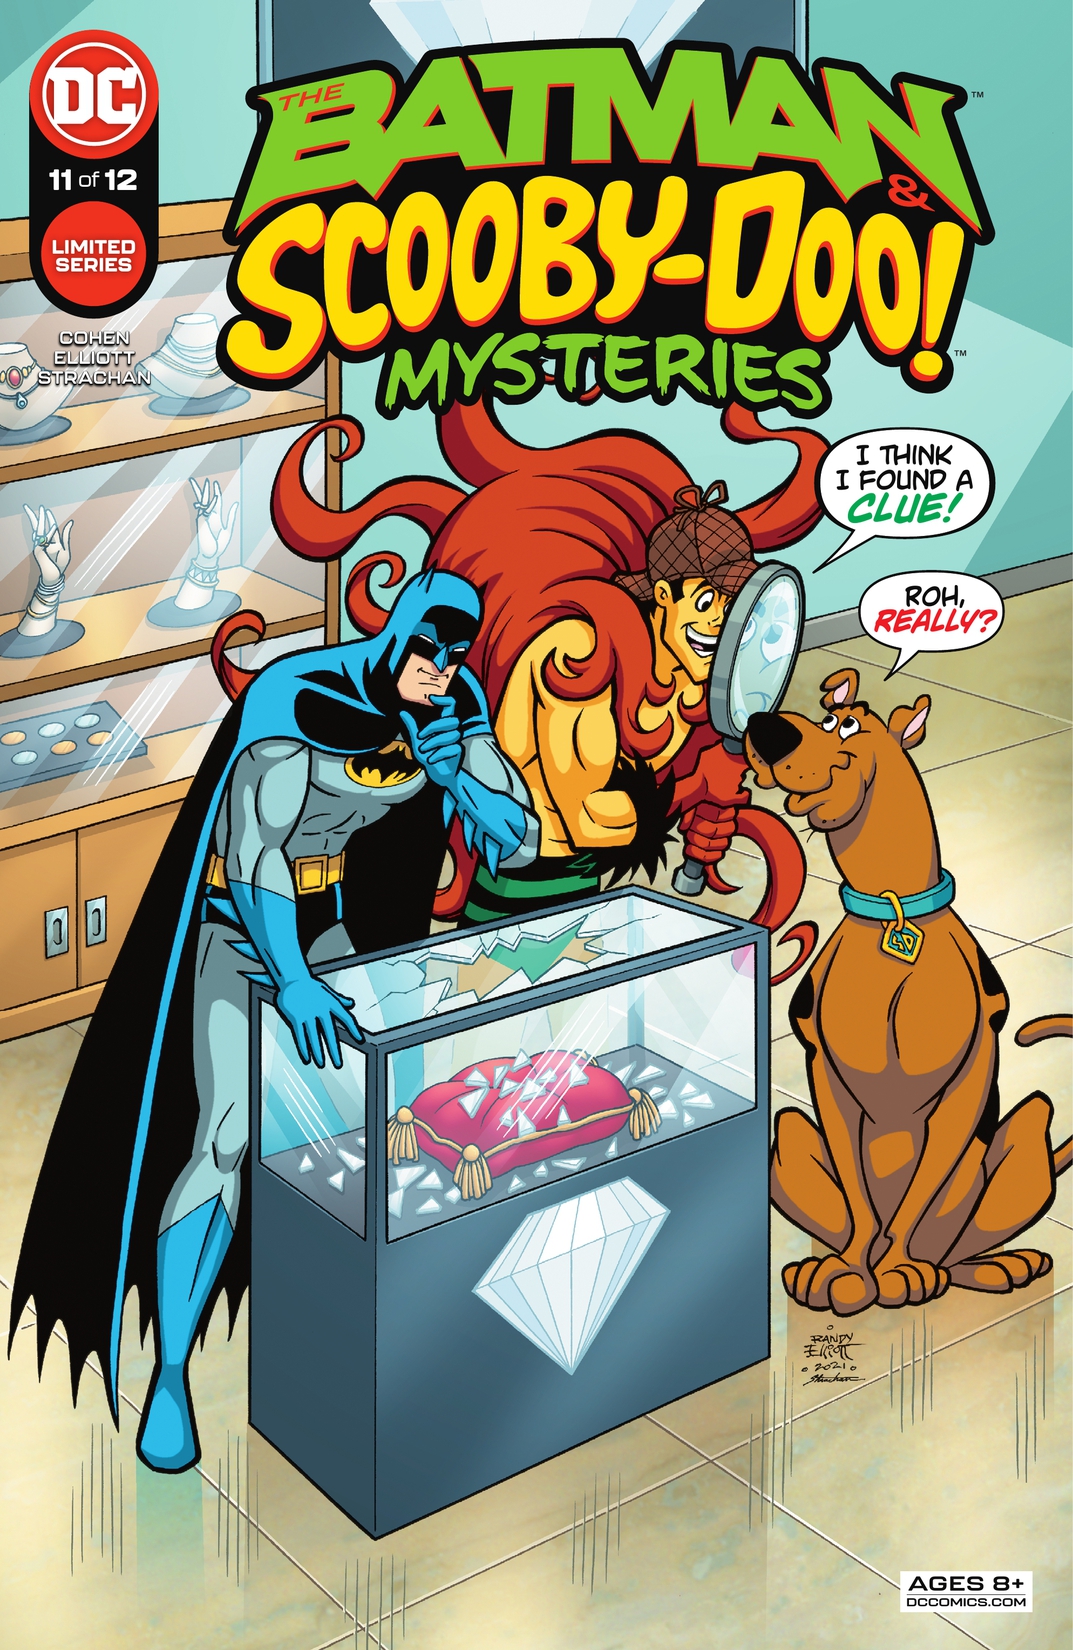 The Batman & Scooby-Doo Mysteries #11 preview images